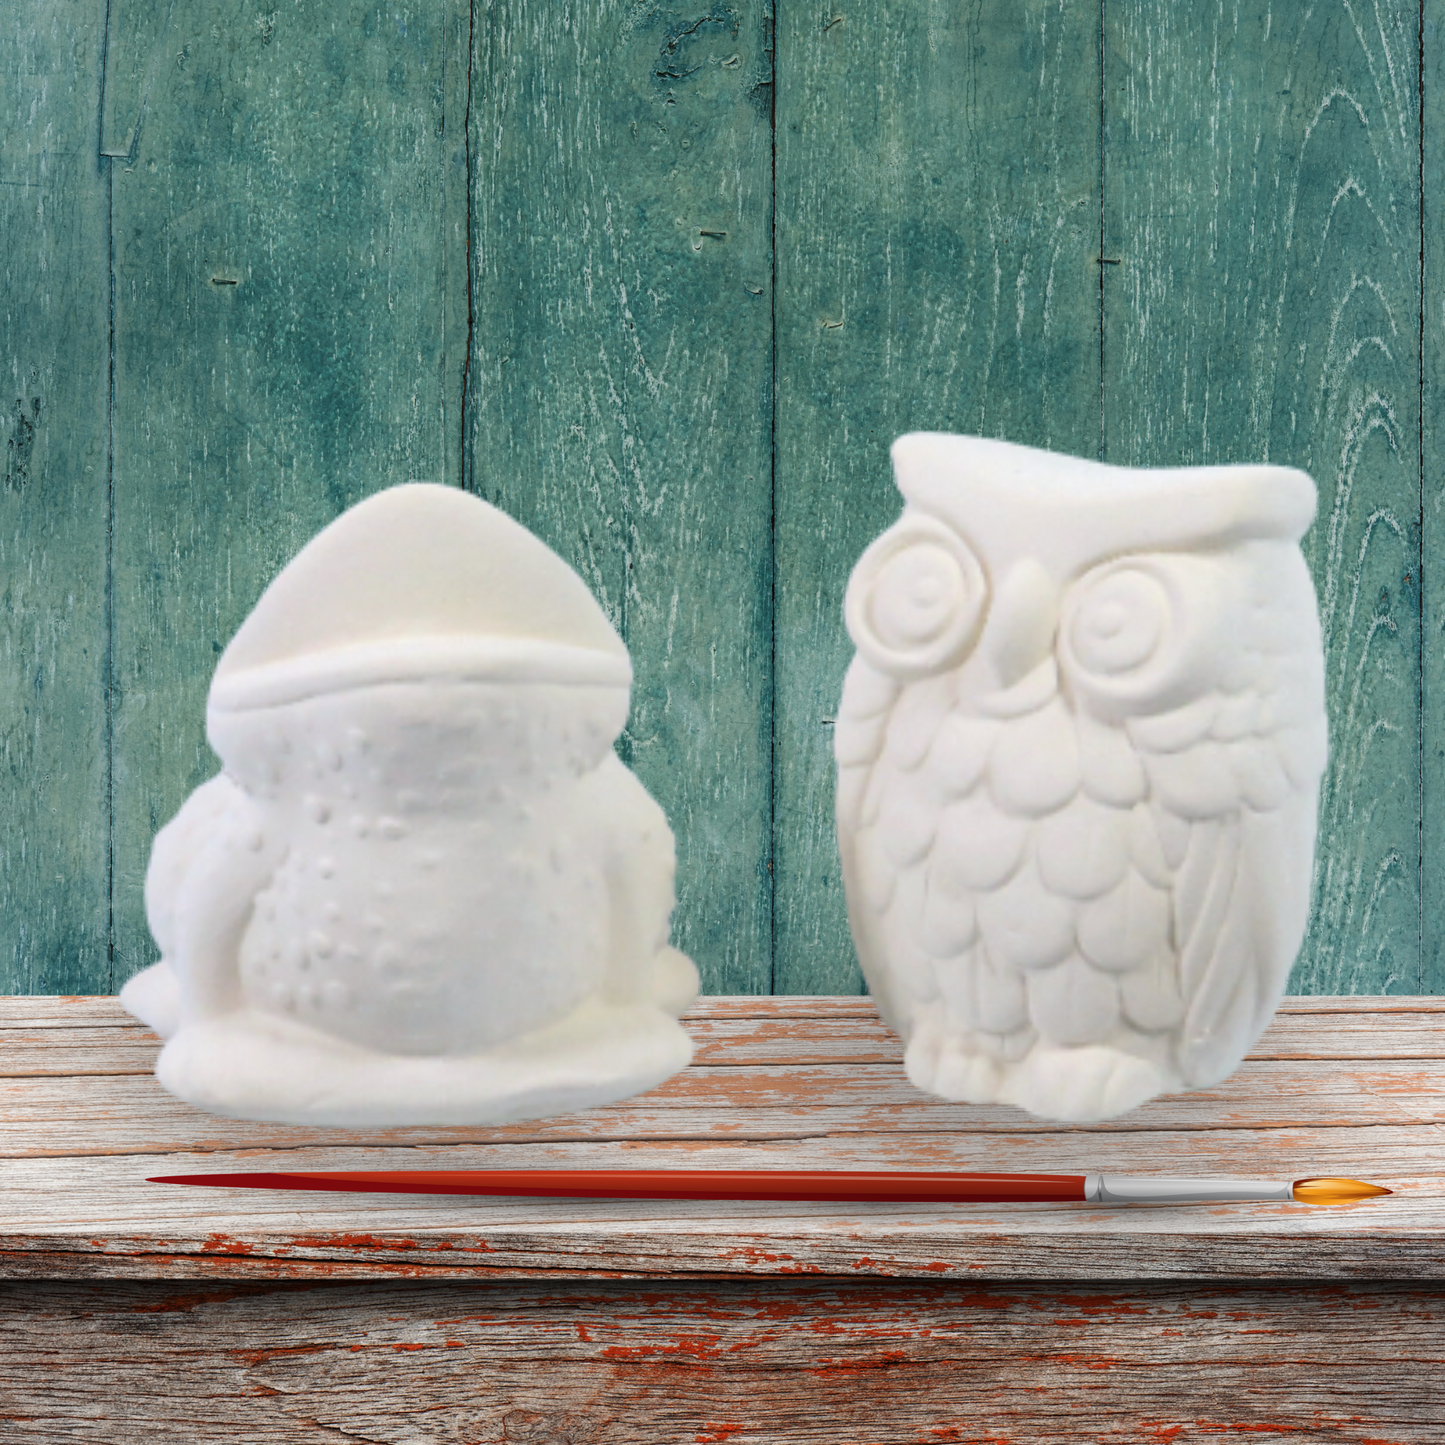 Handmade ready to paint frog and owl figurine set standing on a rustic shelf with a rustic green background.  There is a paintbrush in front of them illustrating that they are to be painted.